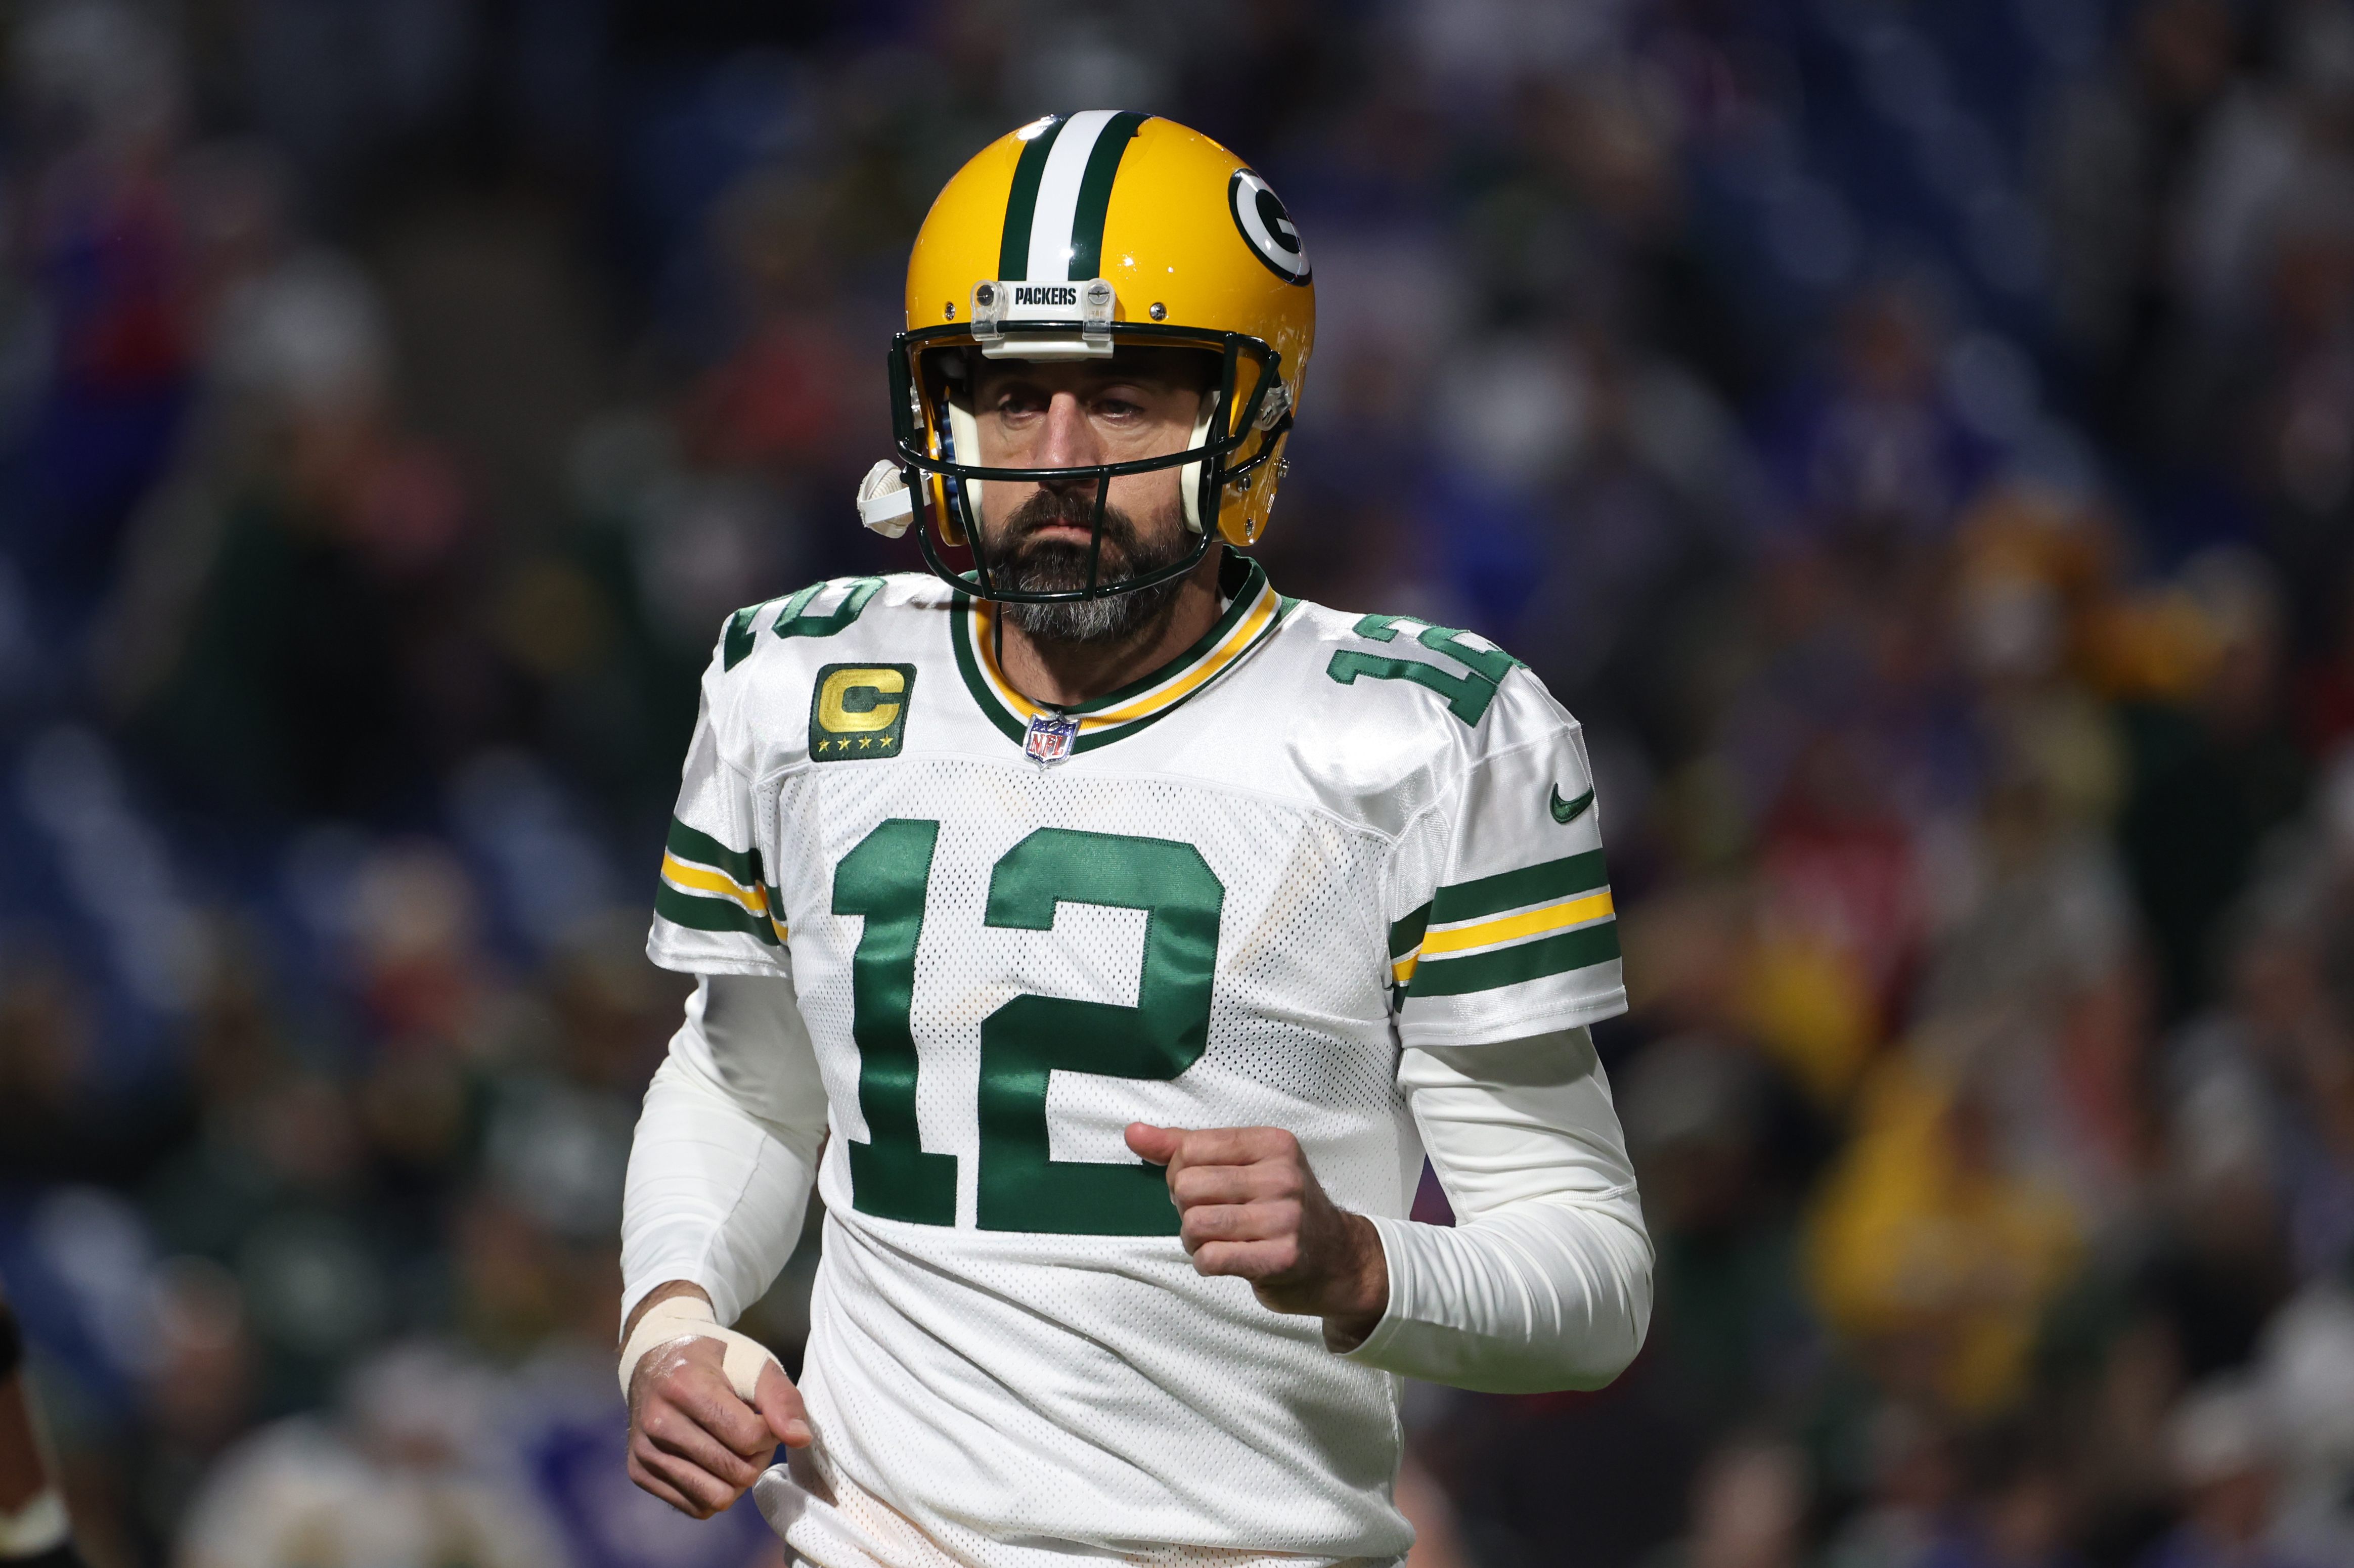 Quarterback Aaron Rodgers the Green Bay Packers warms up before the game against the Buffalo Bills at Highmark Stadium in Orchard Park, New York, October 30, 2022. /CFP 